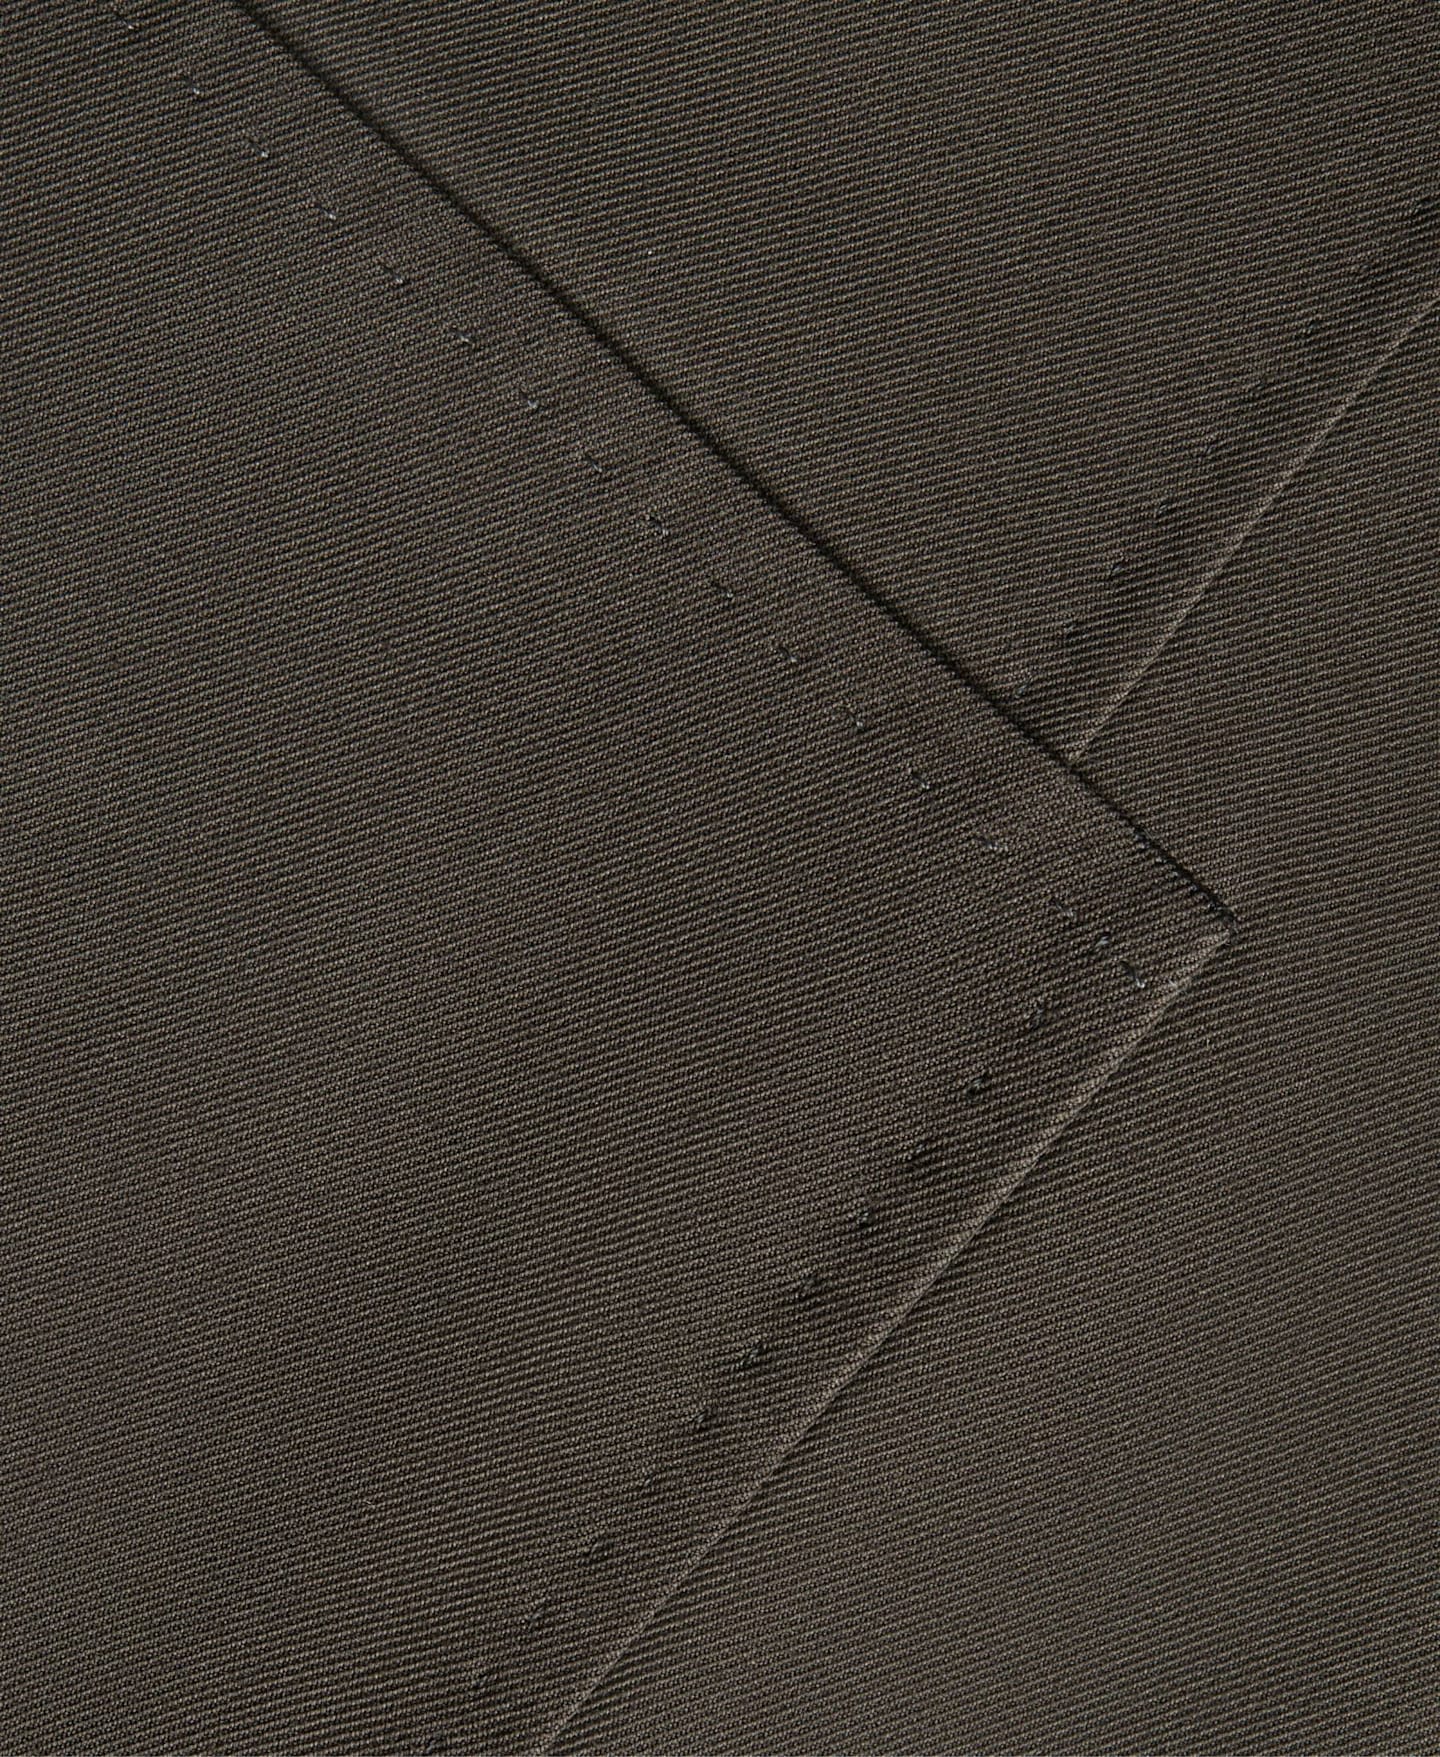 Zoomed in image featuring a 6mm stitching.